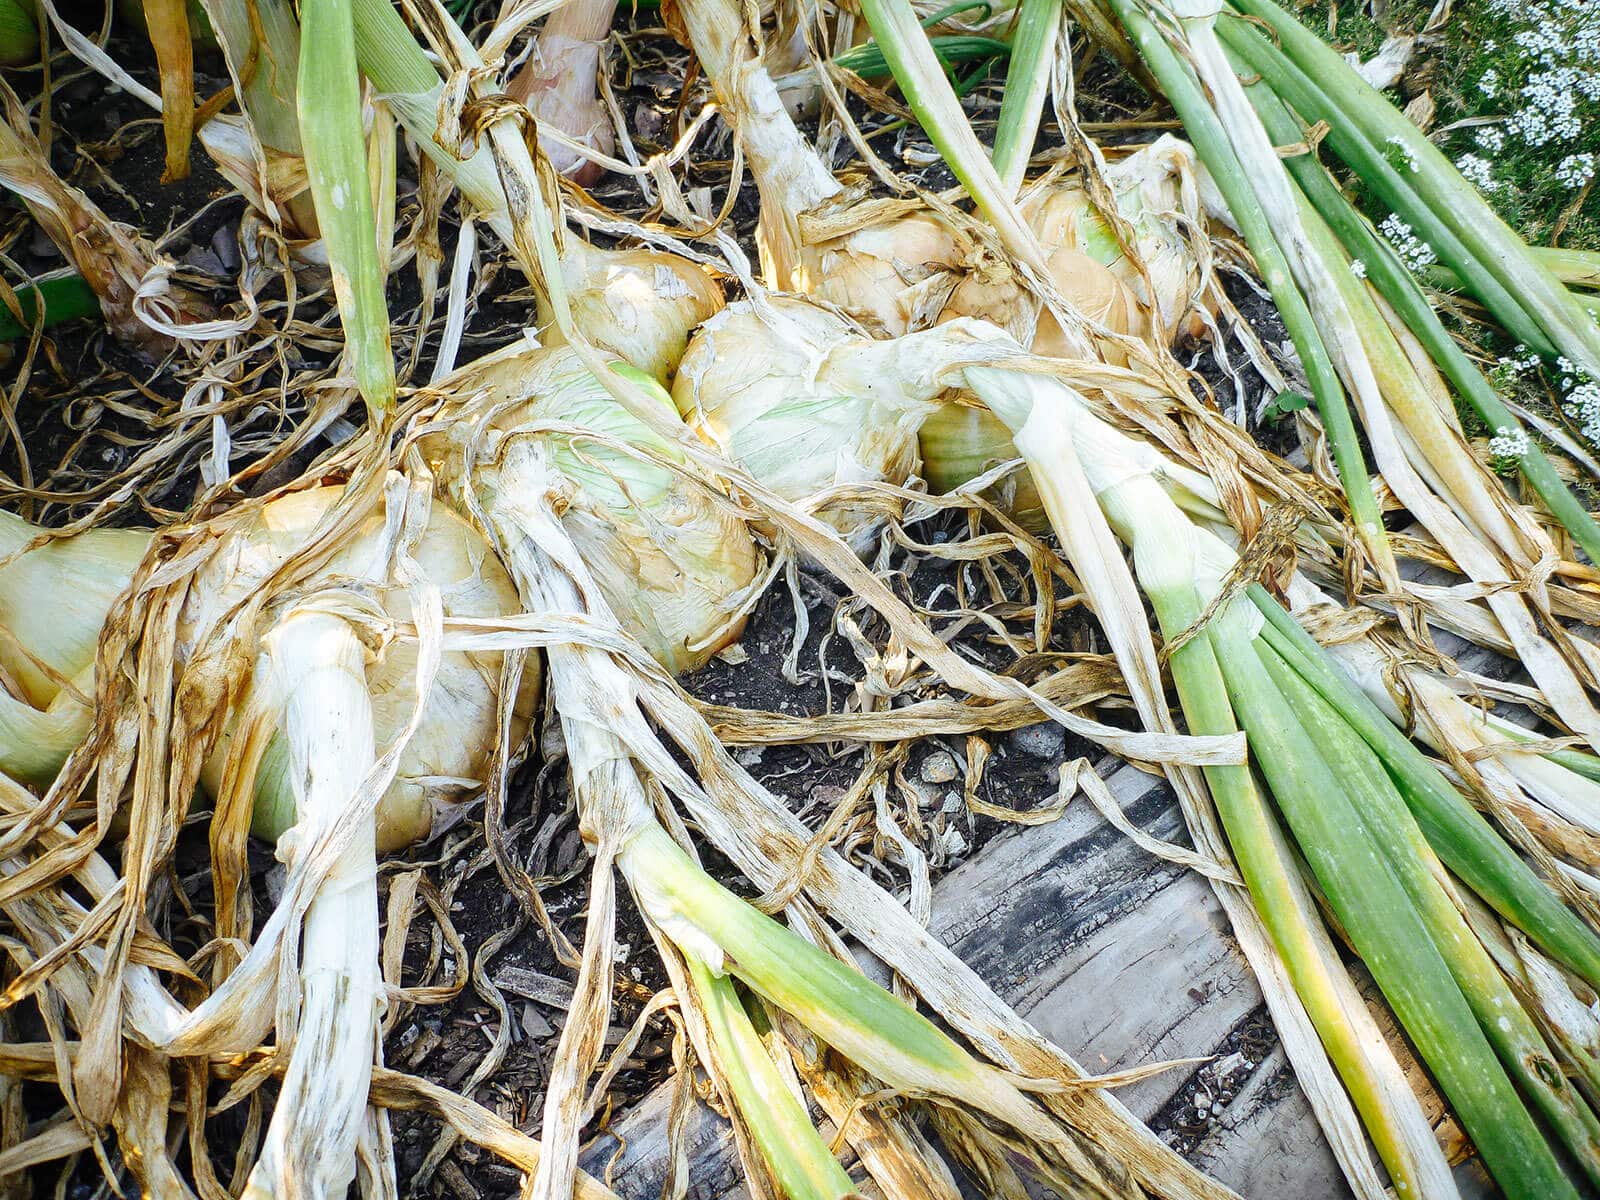 Mature globe onions with green stems bent over at the base